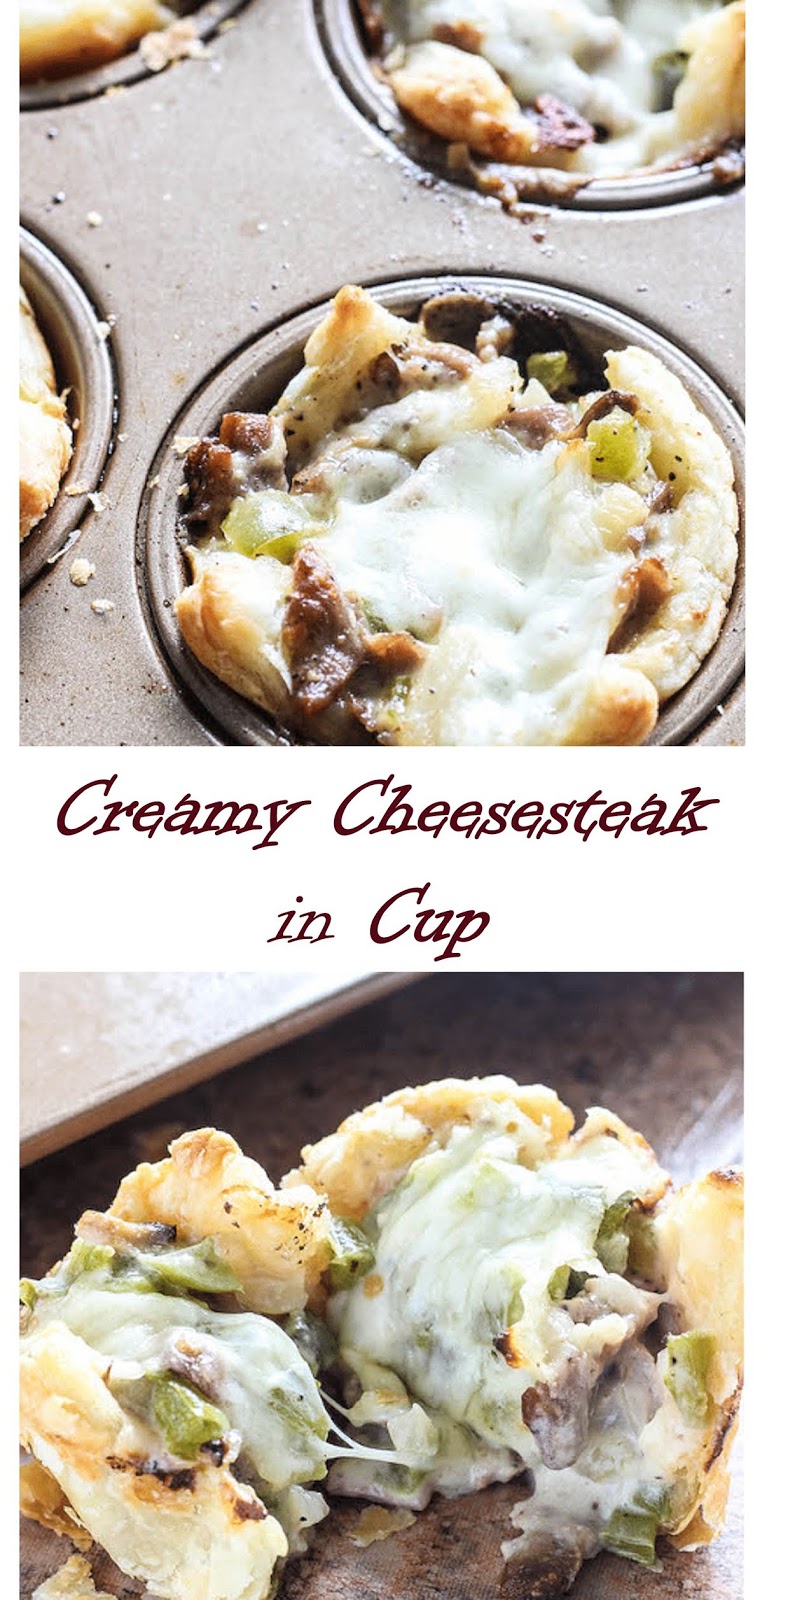 588 Reviews: My BEST #Recipes >> Creamy #Cheesesteak Cup - ....